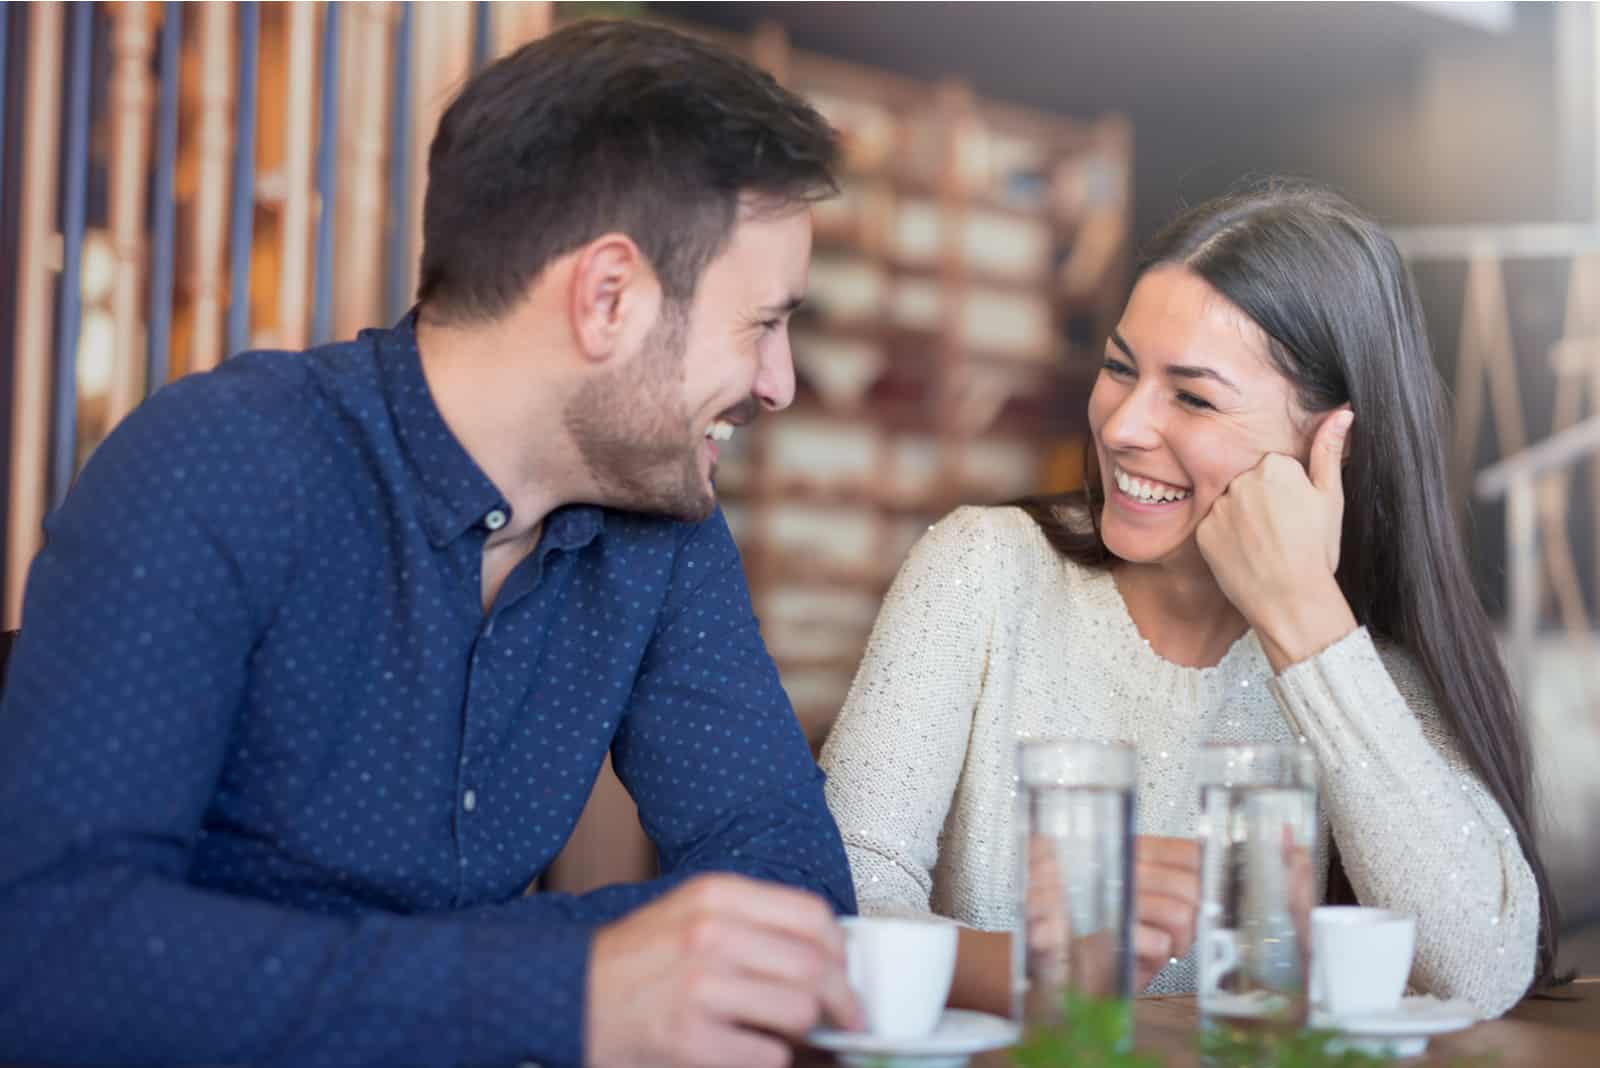 the man and woman sitting at the table smiling and looking into each other's eyes